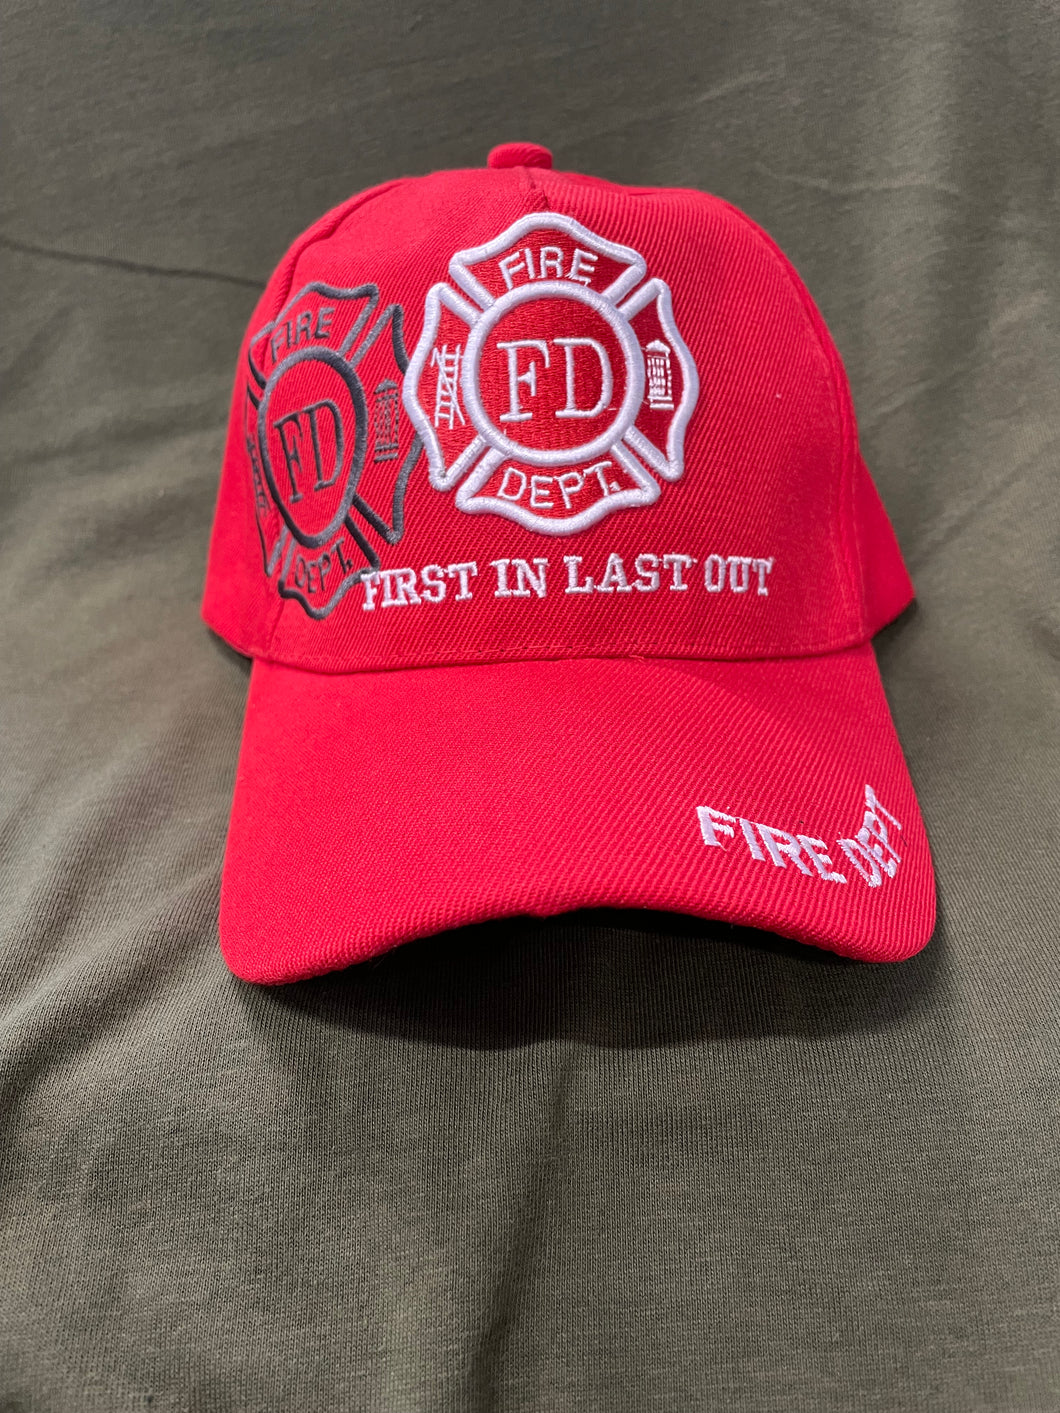 FRONT VIEW OF RED AND WHITE FIRE DEPT CAP